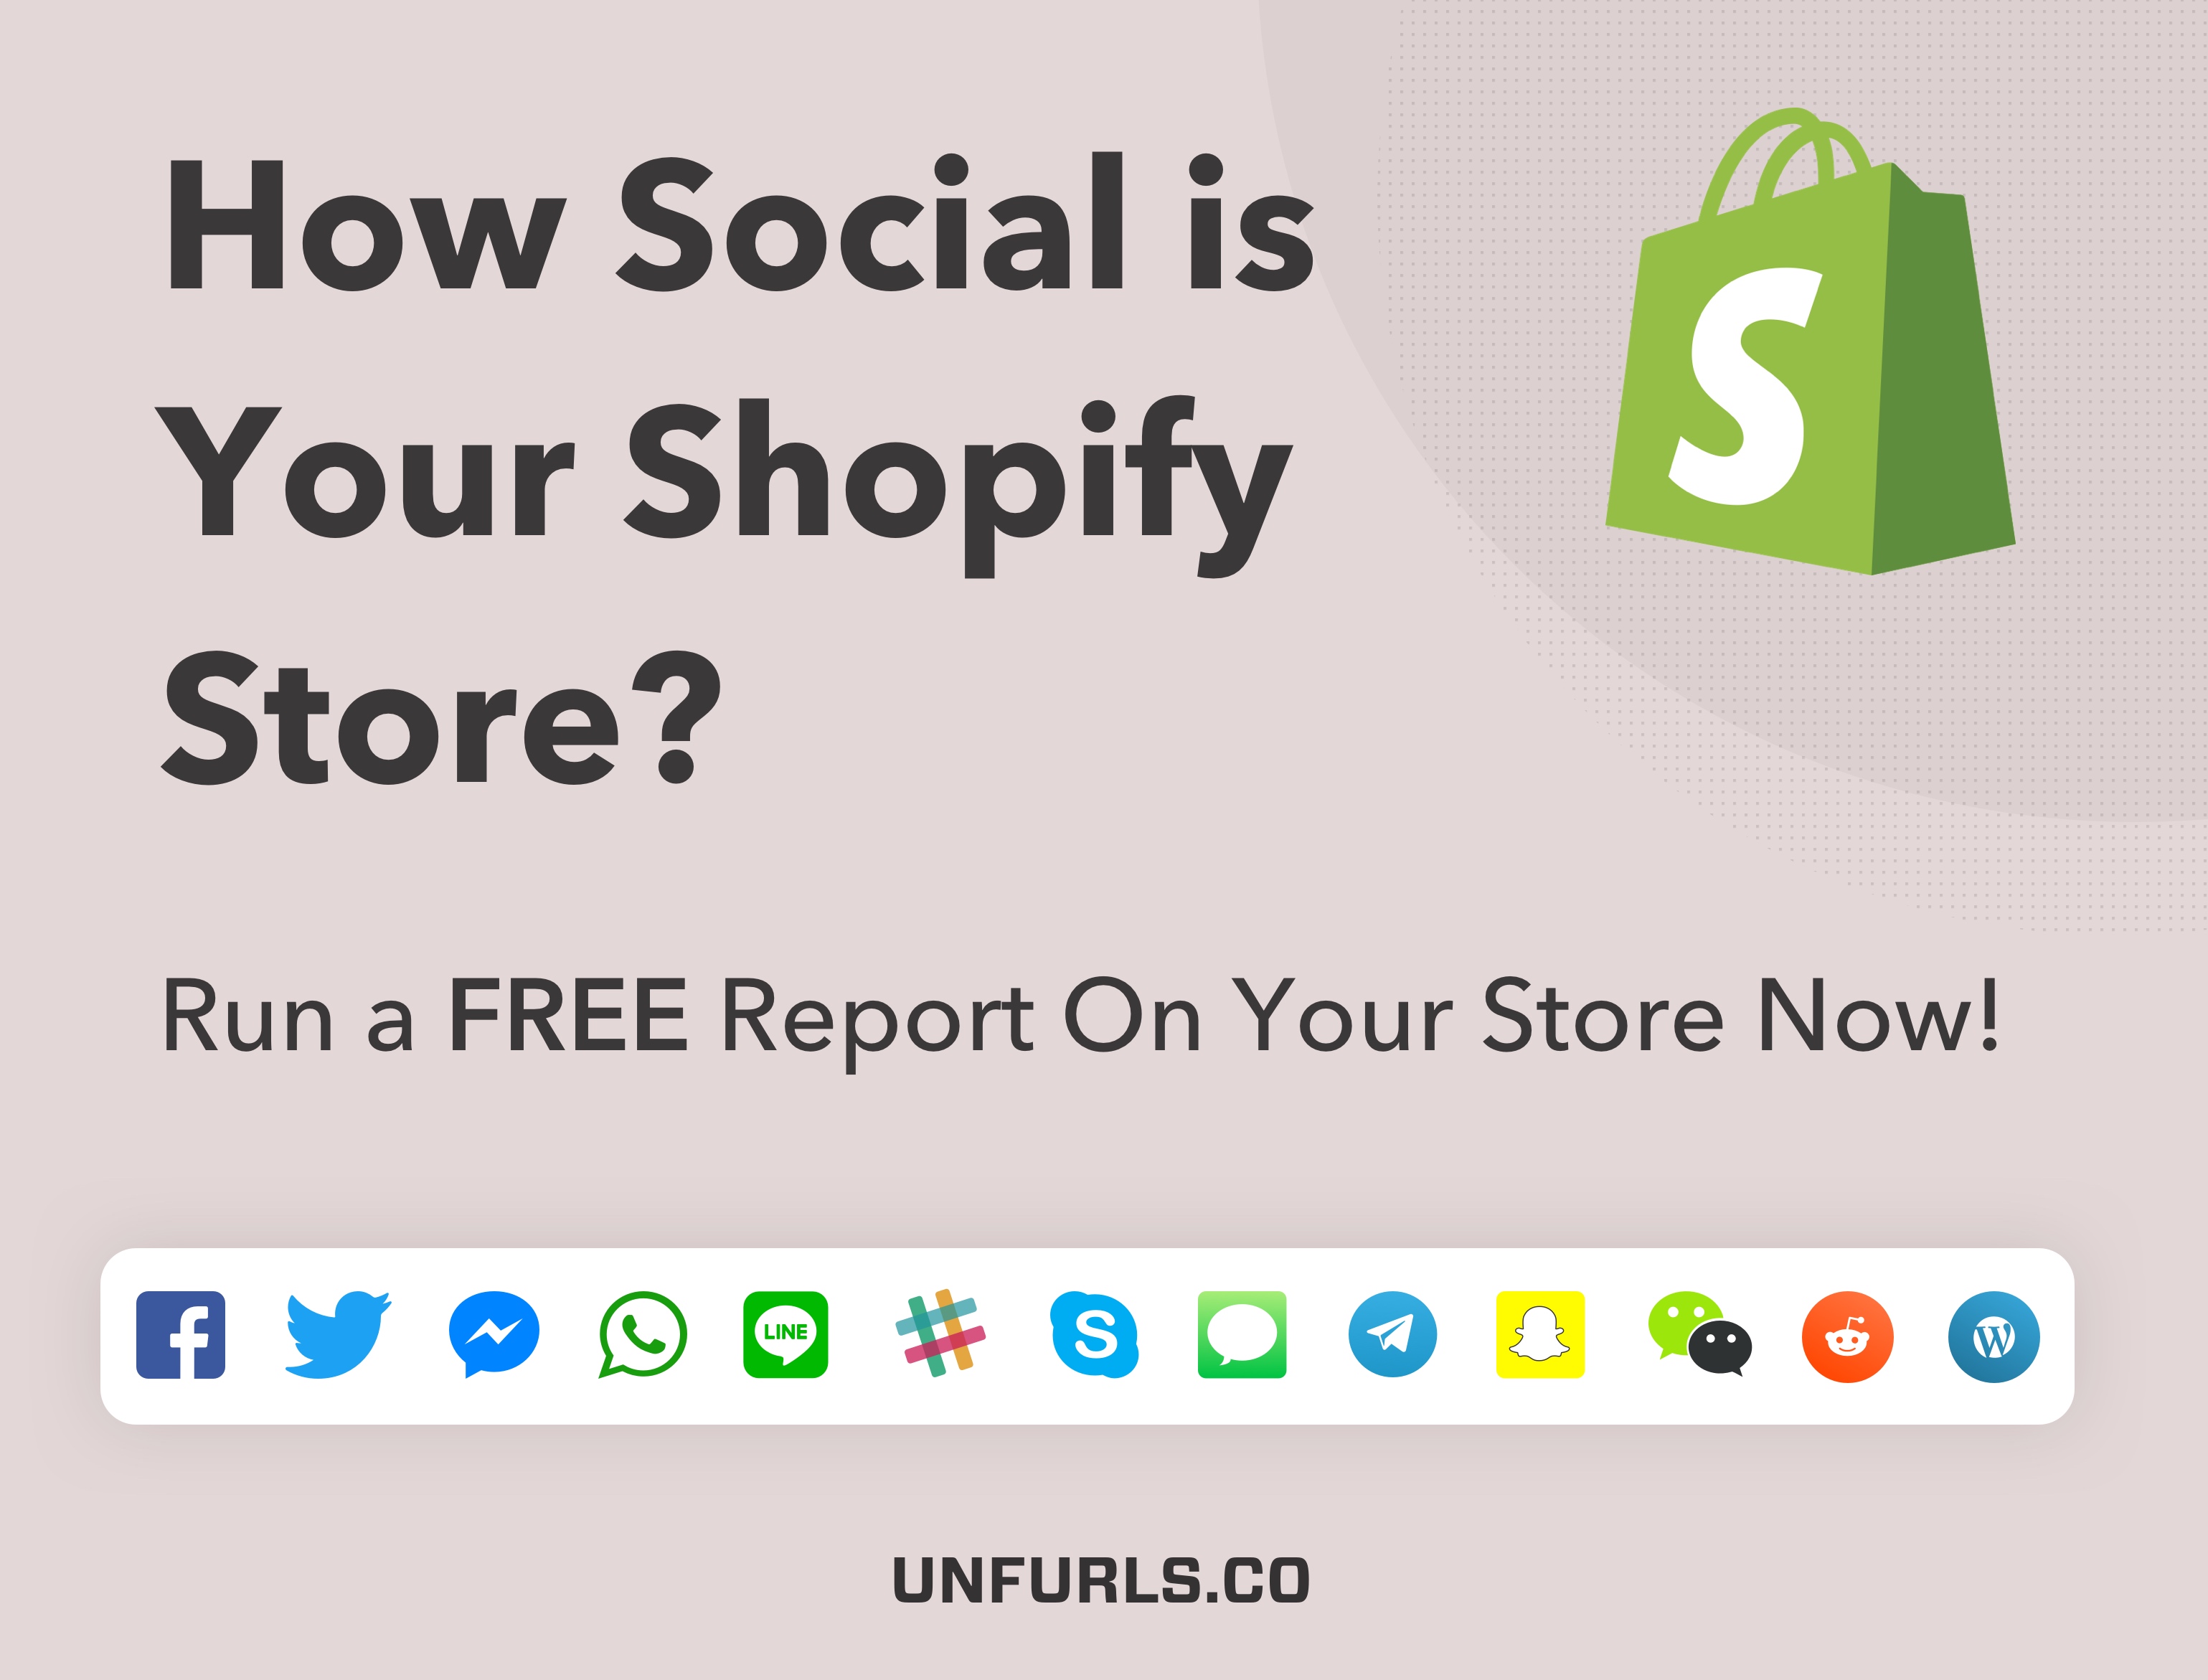 how social is your shopify store?